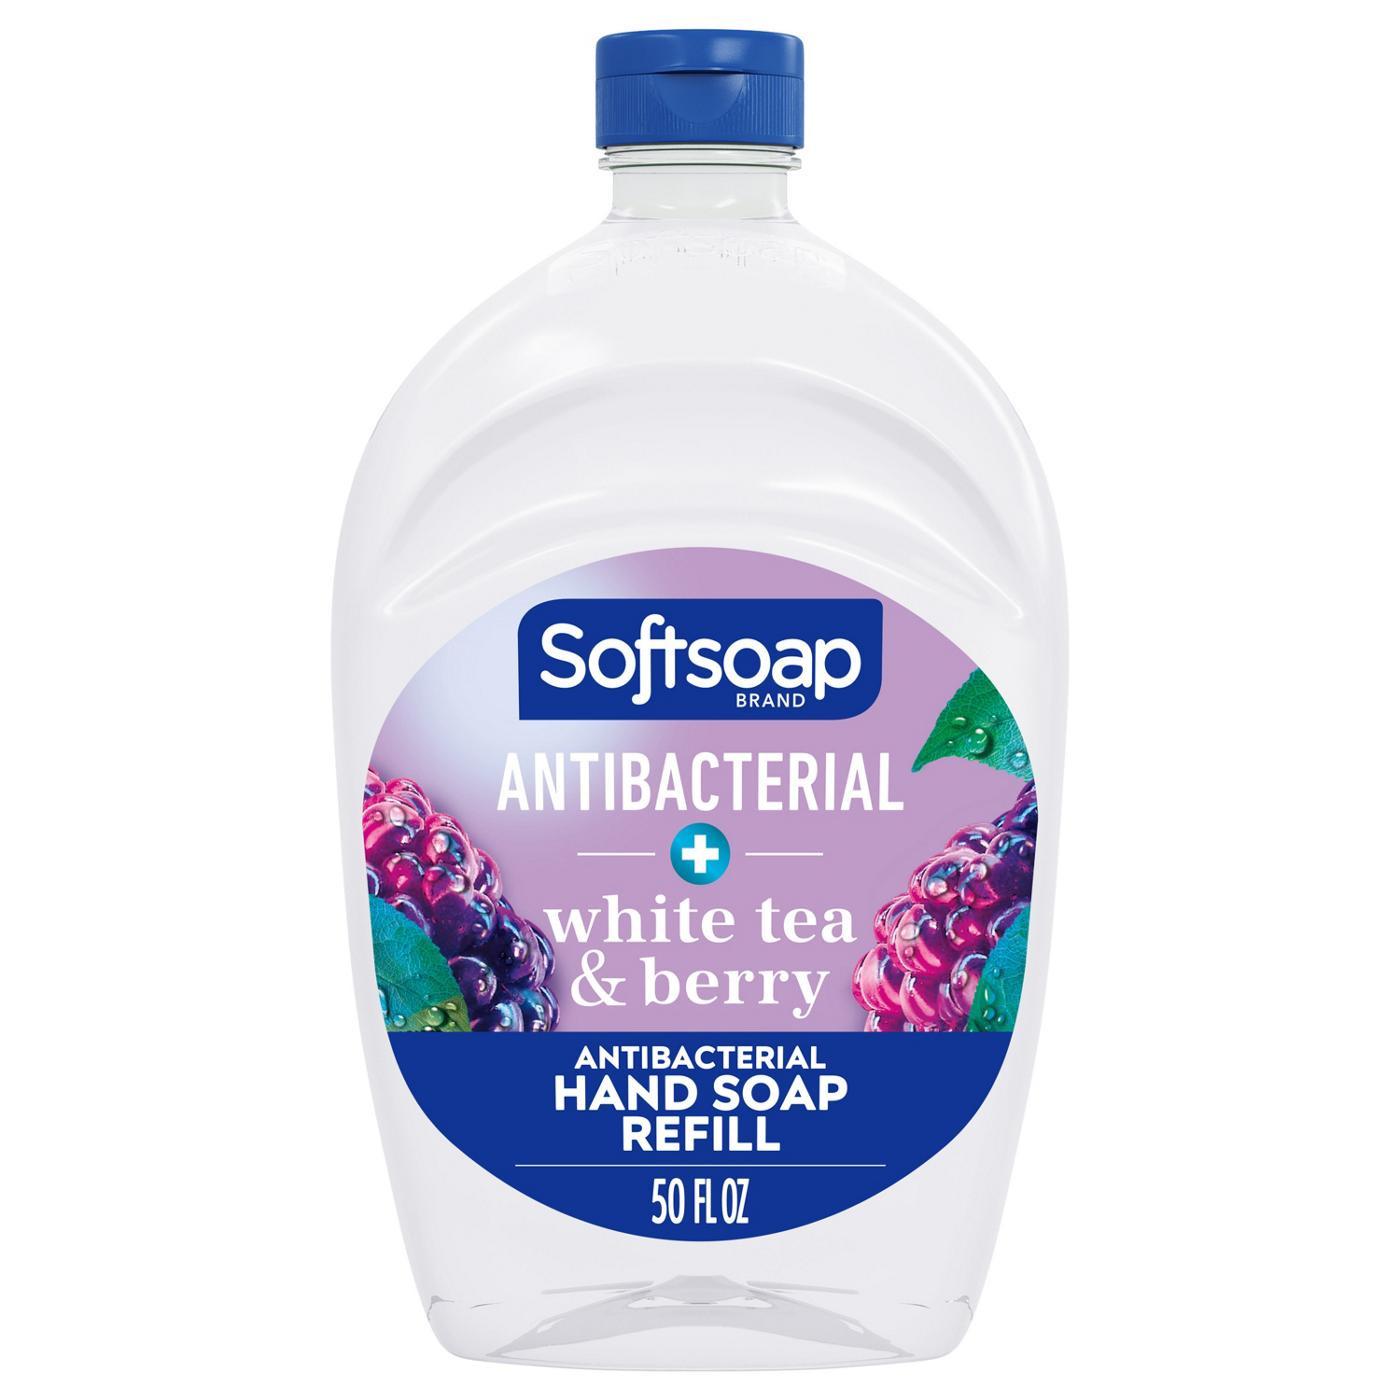 Softsoap Antibacterial Refill Hand Soap - White Tea & Berry; image 1 of 8